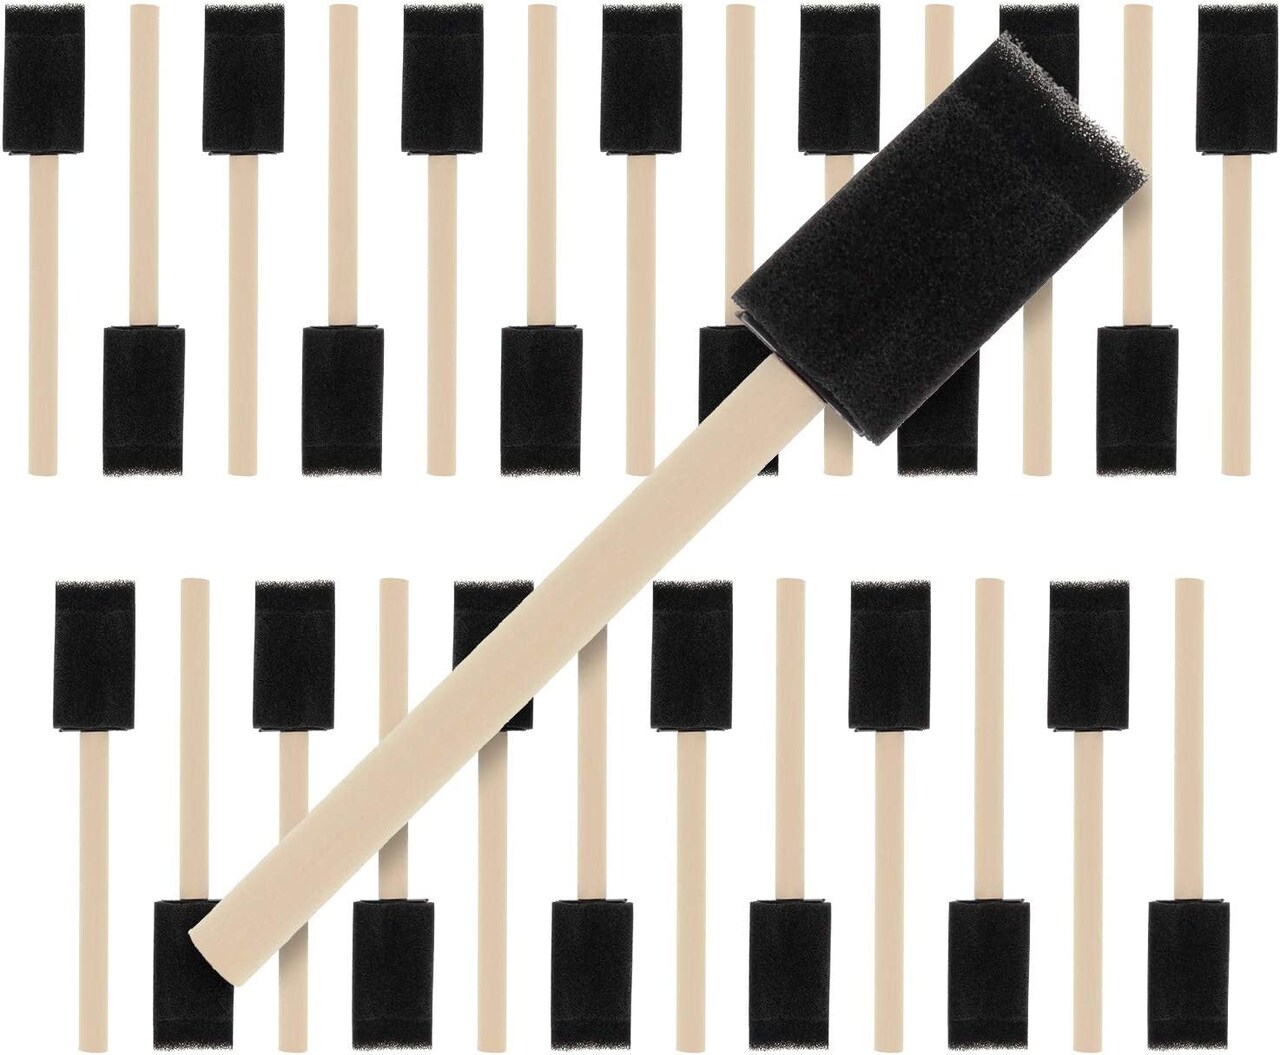 1 Inch Foam Sponge Wood Handle Paint Brush Set (Value Pack of 50) -  Lightweight, Durable and Great for Acrylics, Stains, Varnishes, Crafts, Art